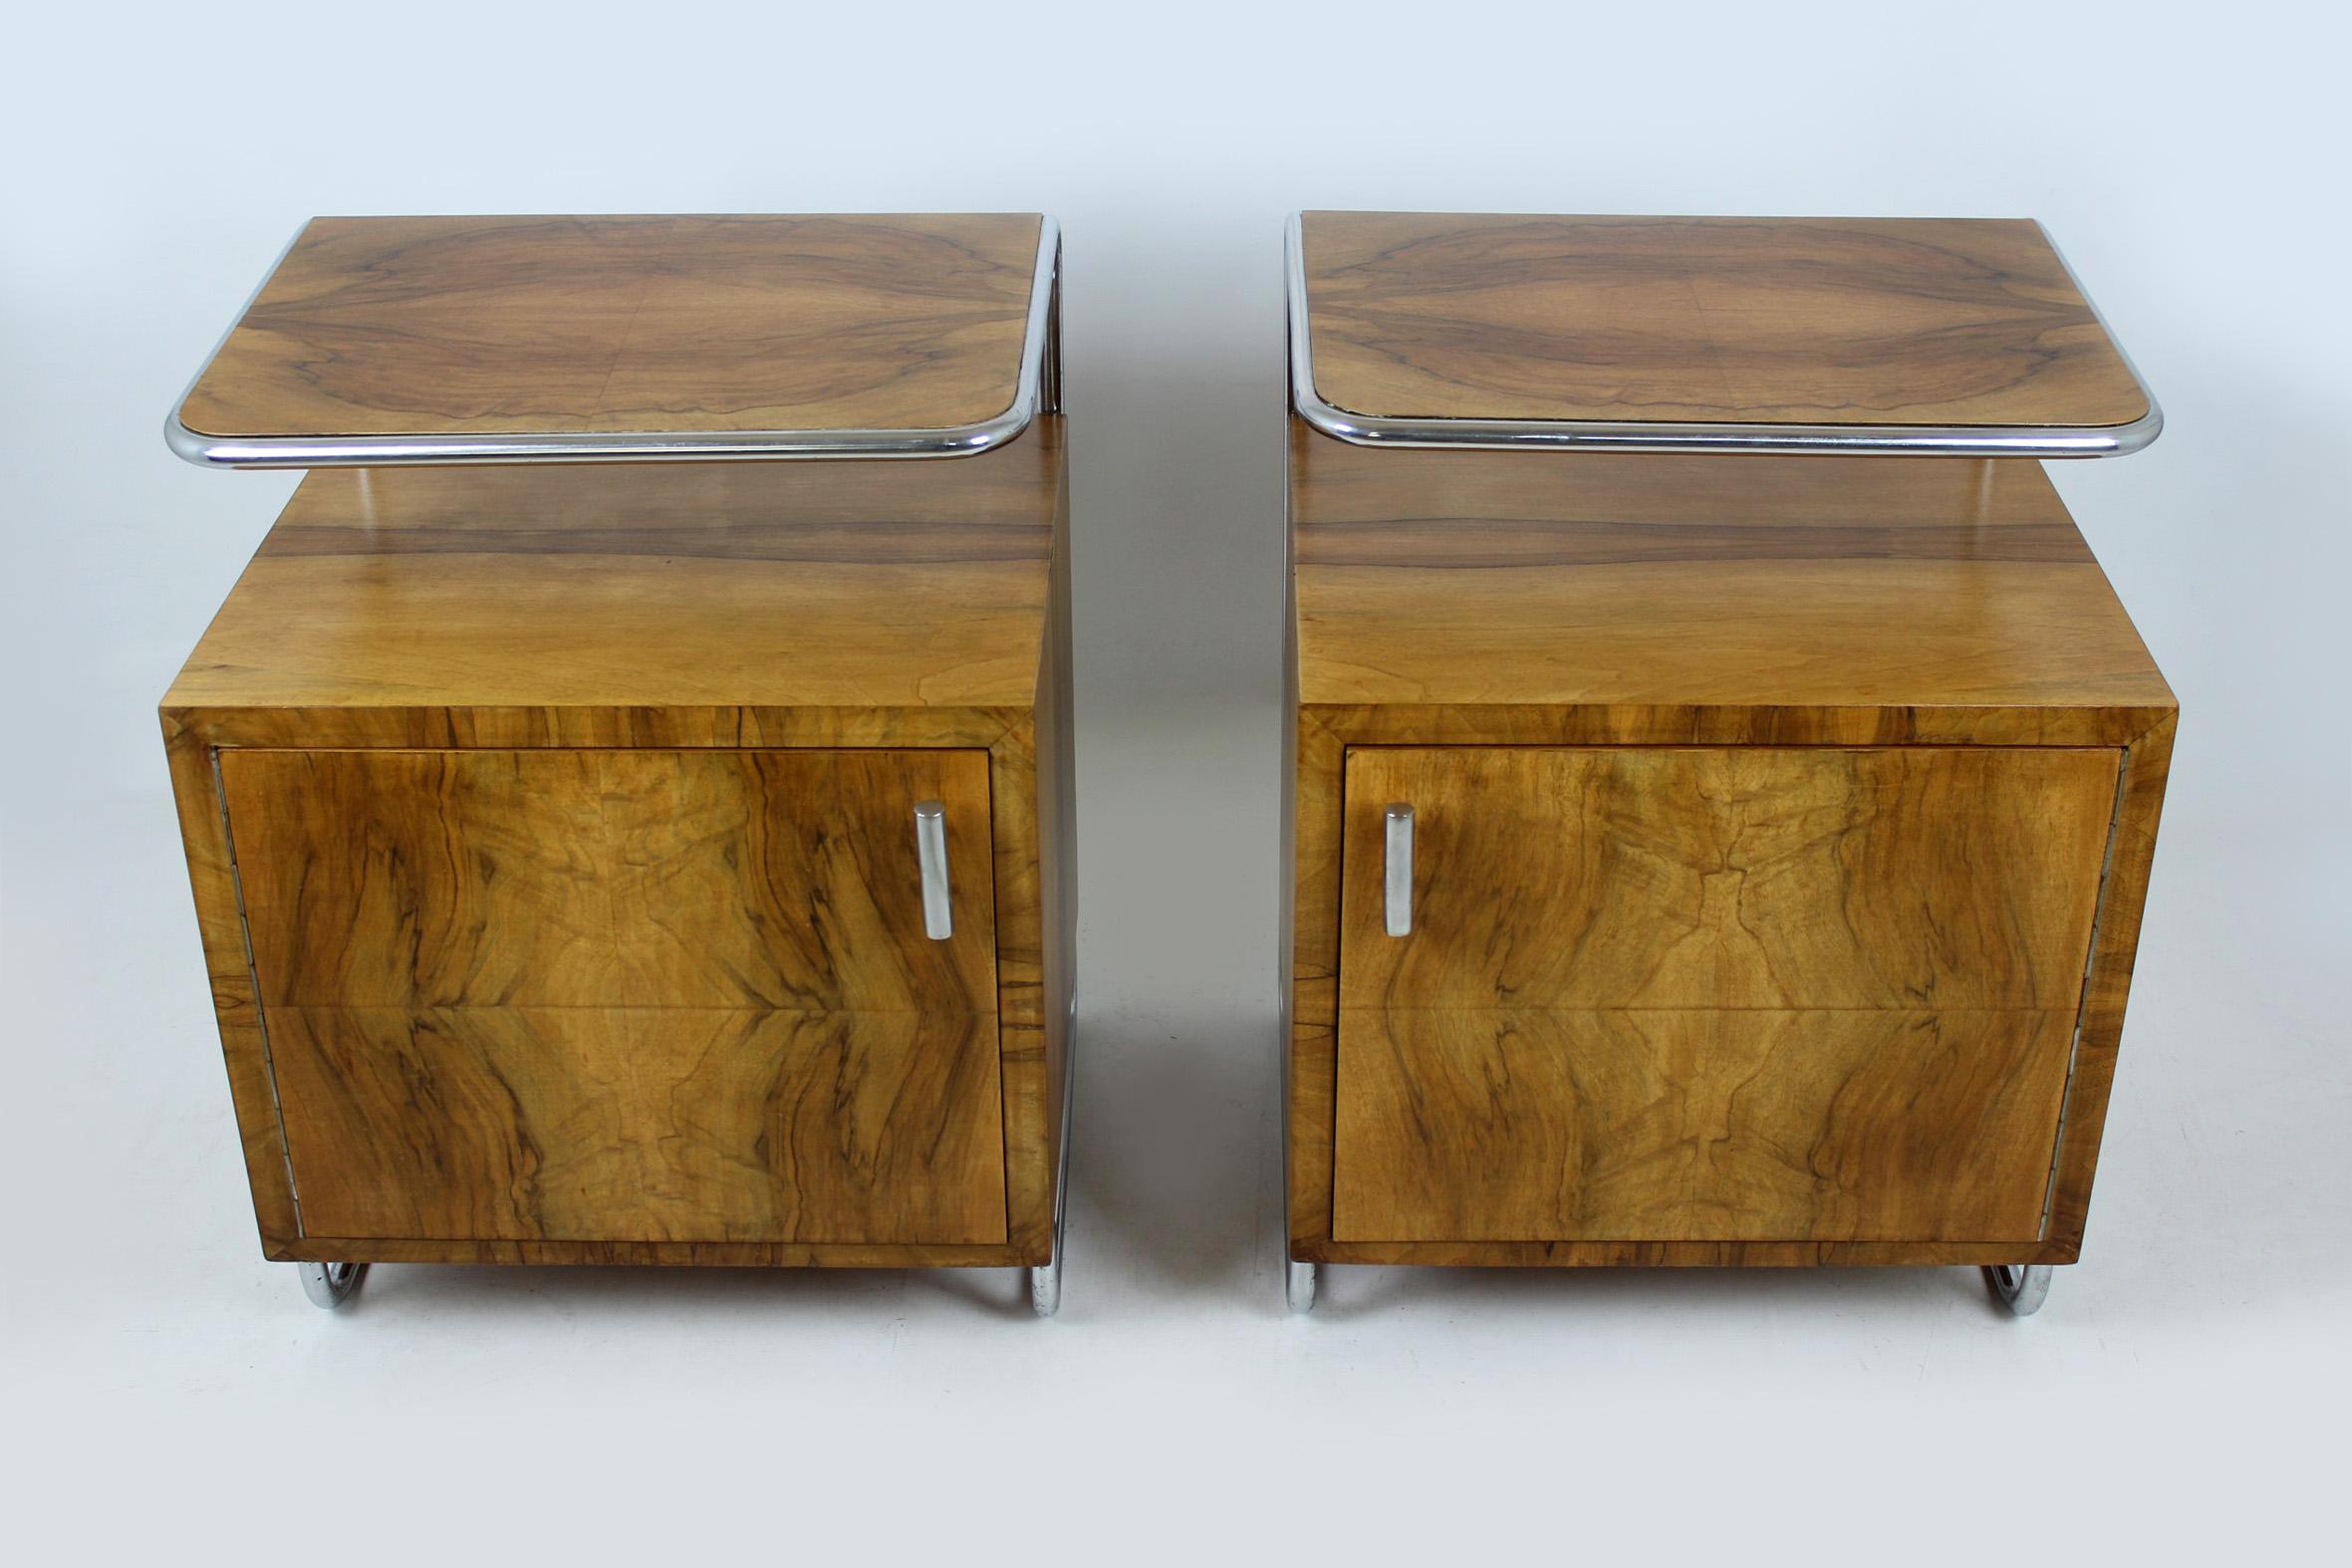 A pair of Bauhaus style side tables. Manufactured in the 1930s, made of wood with a chromed tubular steel frame.